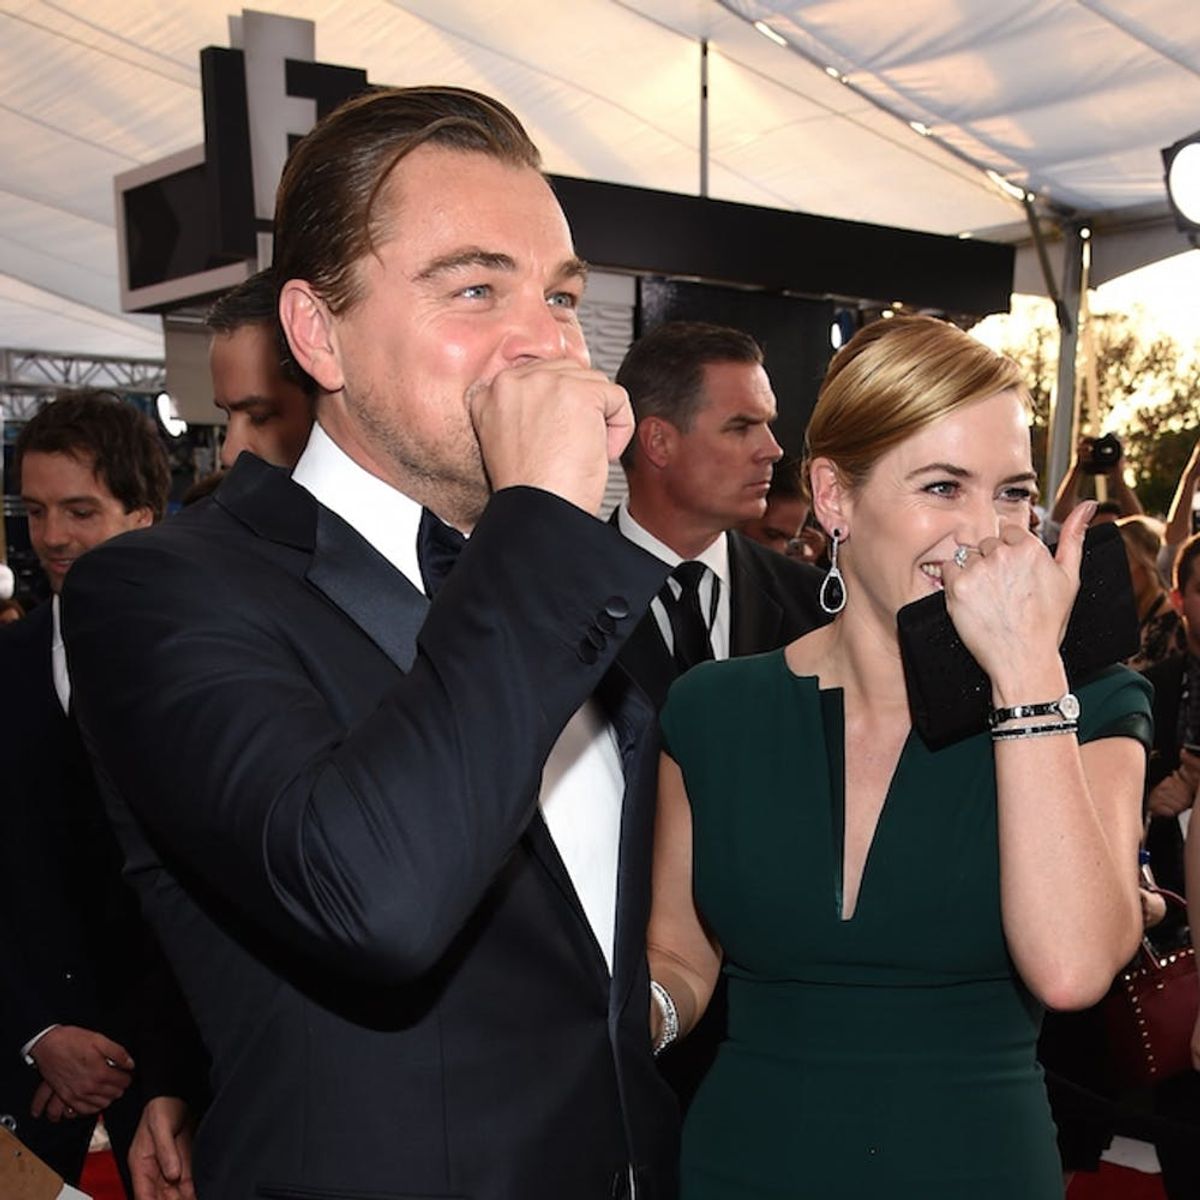 Kate Winslet and Leonardo DiCaprio’s SAG Awards Reunion Is the 1997 Time Warp of Our Dreams